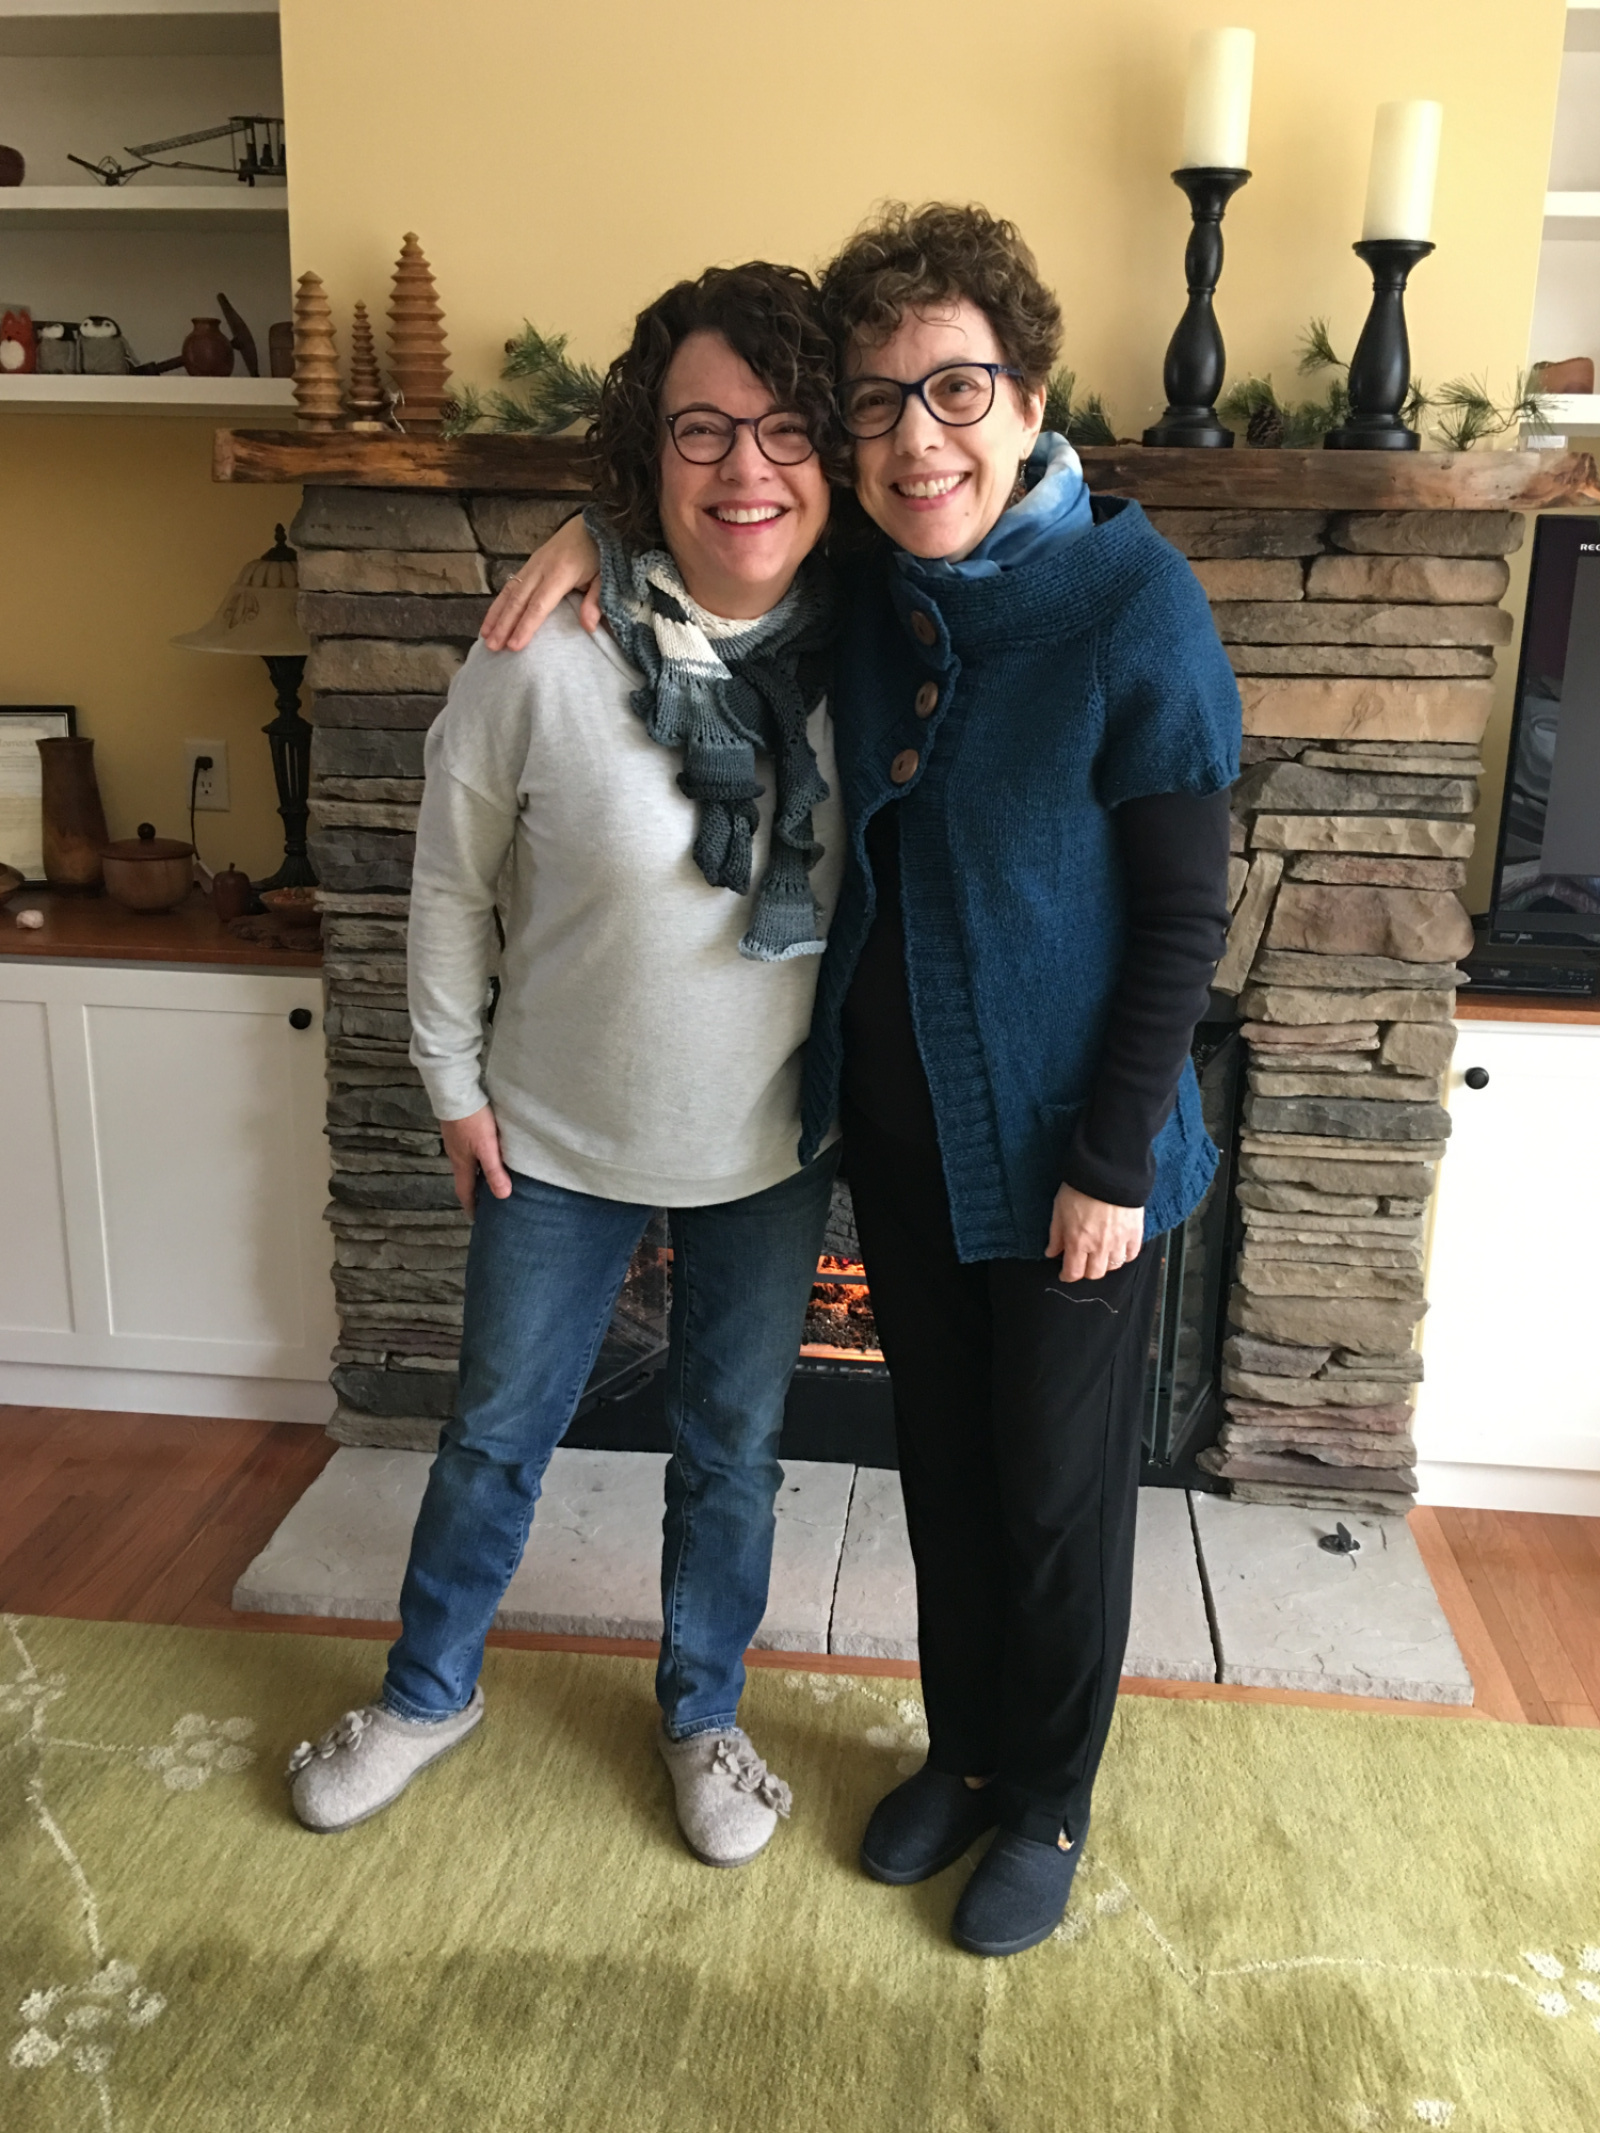 Sisters! The day before my first chemotherapy treatment on Feb 5, 2019.